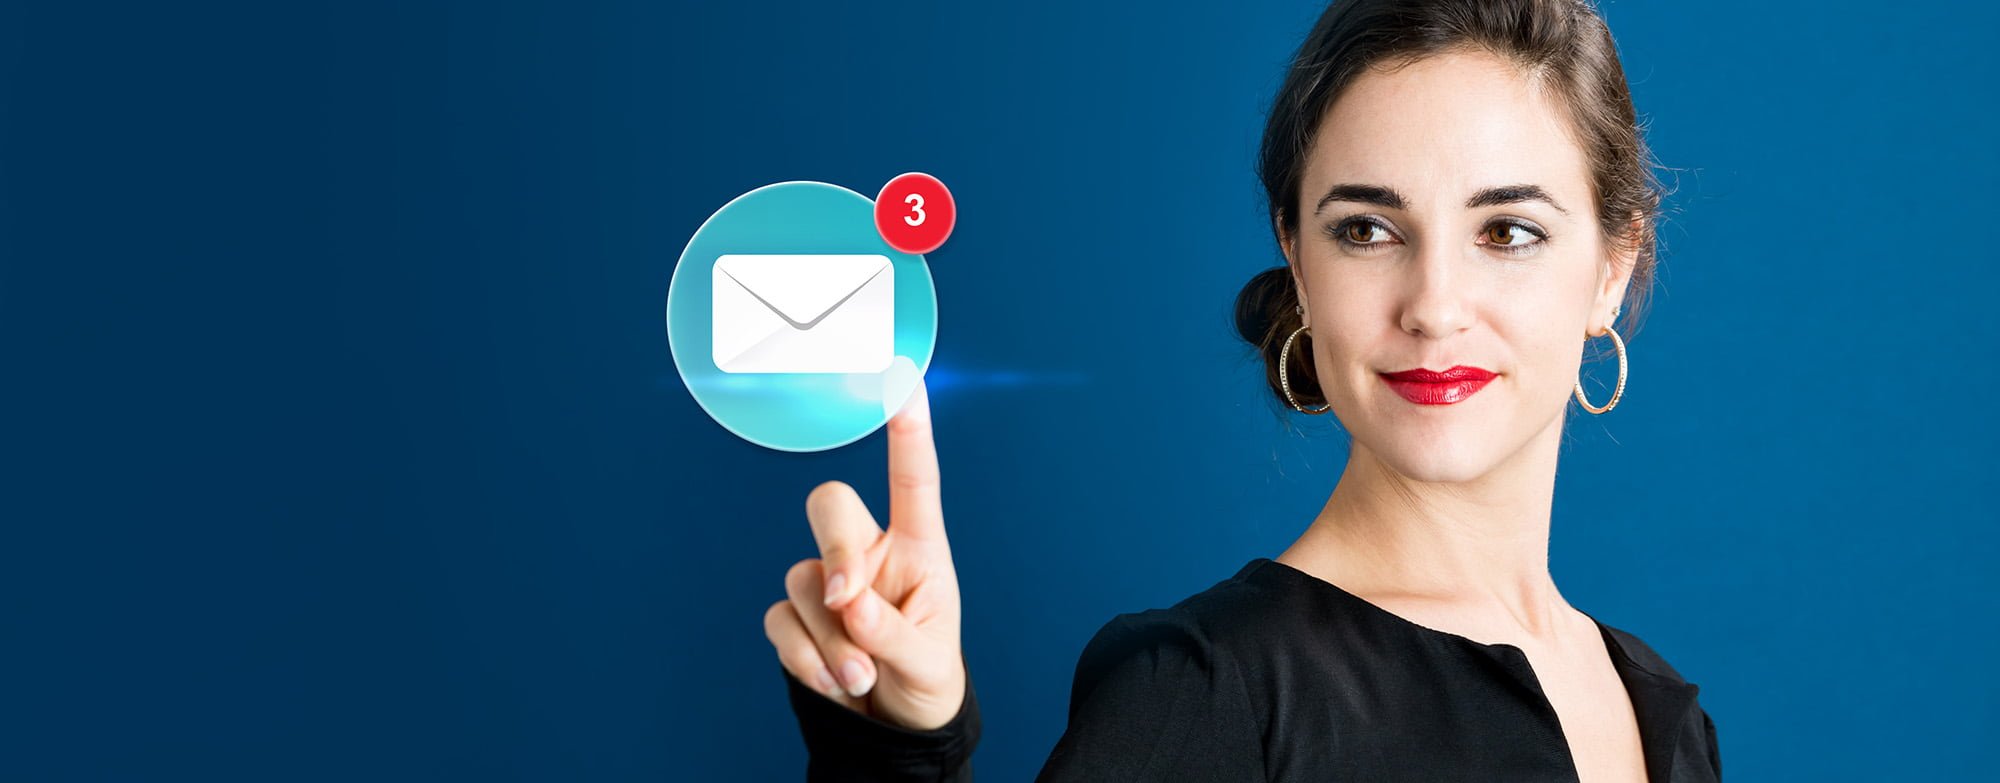 Email icon with business woman on a dark blue background